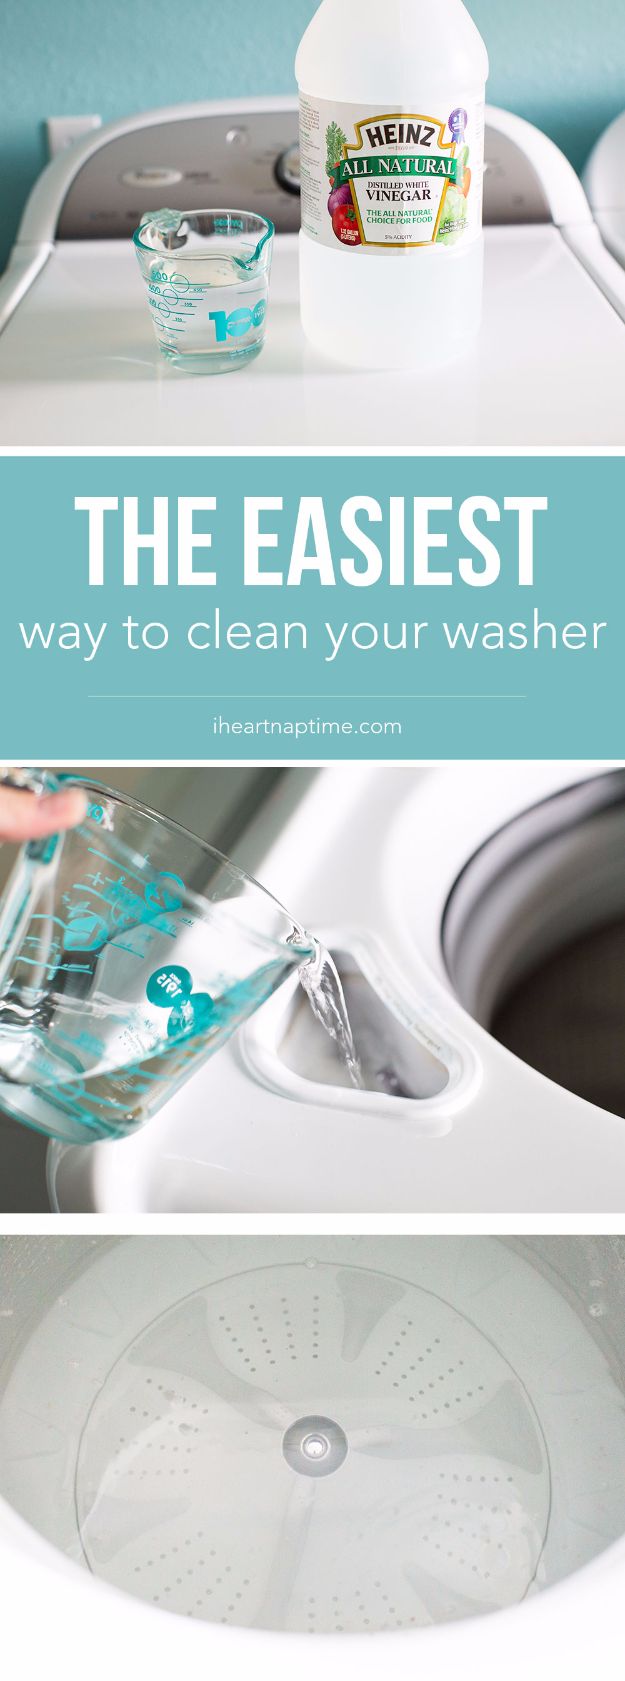 Best Spring Cleaning Ideas - Easiest Way to Clean Your Washer - Easy Cleaning Tips For Home - DIY Cleaning Hacks and Product Recipes - Tips and Tricks for Cleaning the Bathroom, Kitchen, Floors and Countertops - Cheap Solutions for A Clean House #springcleaning